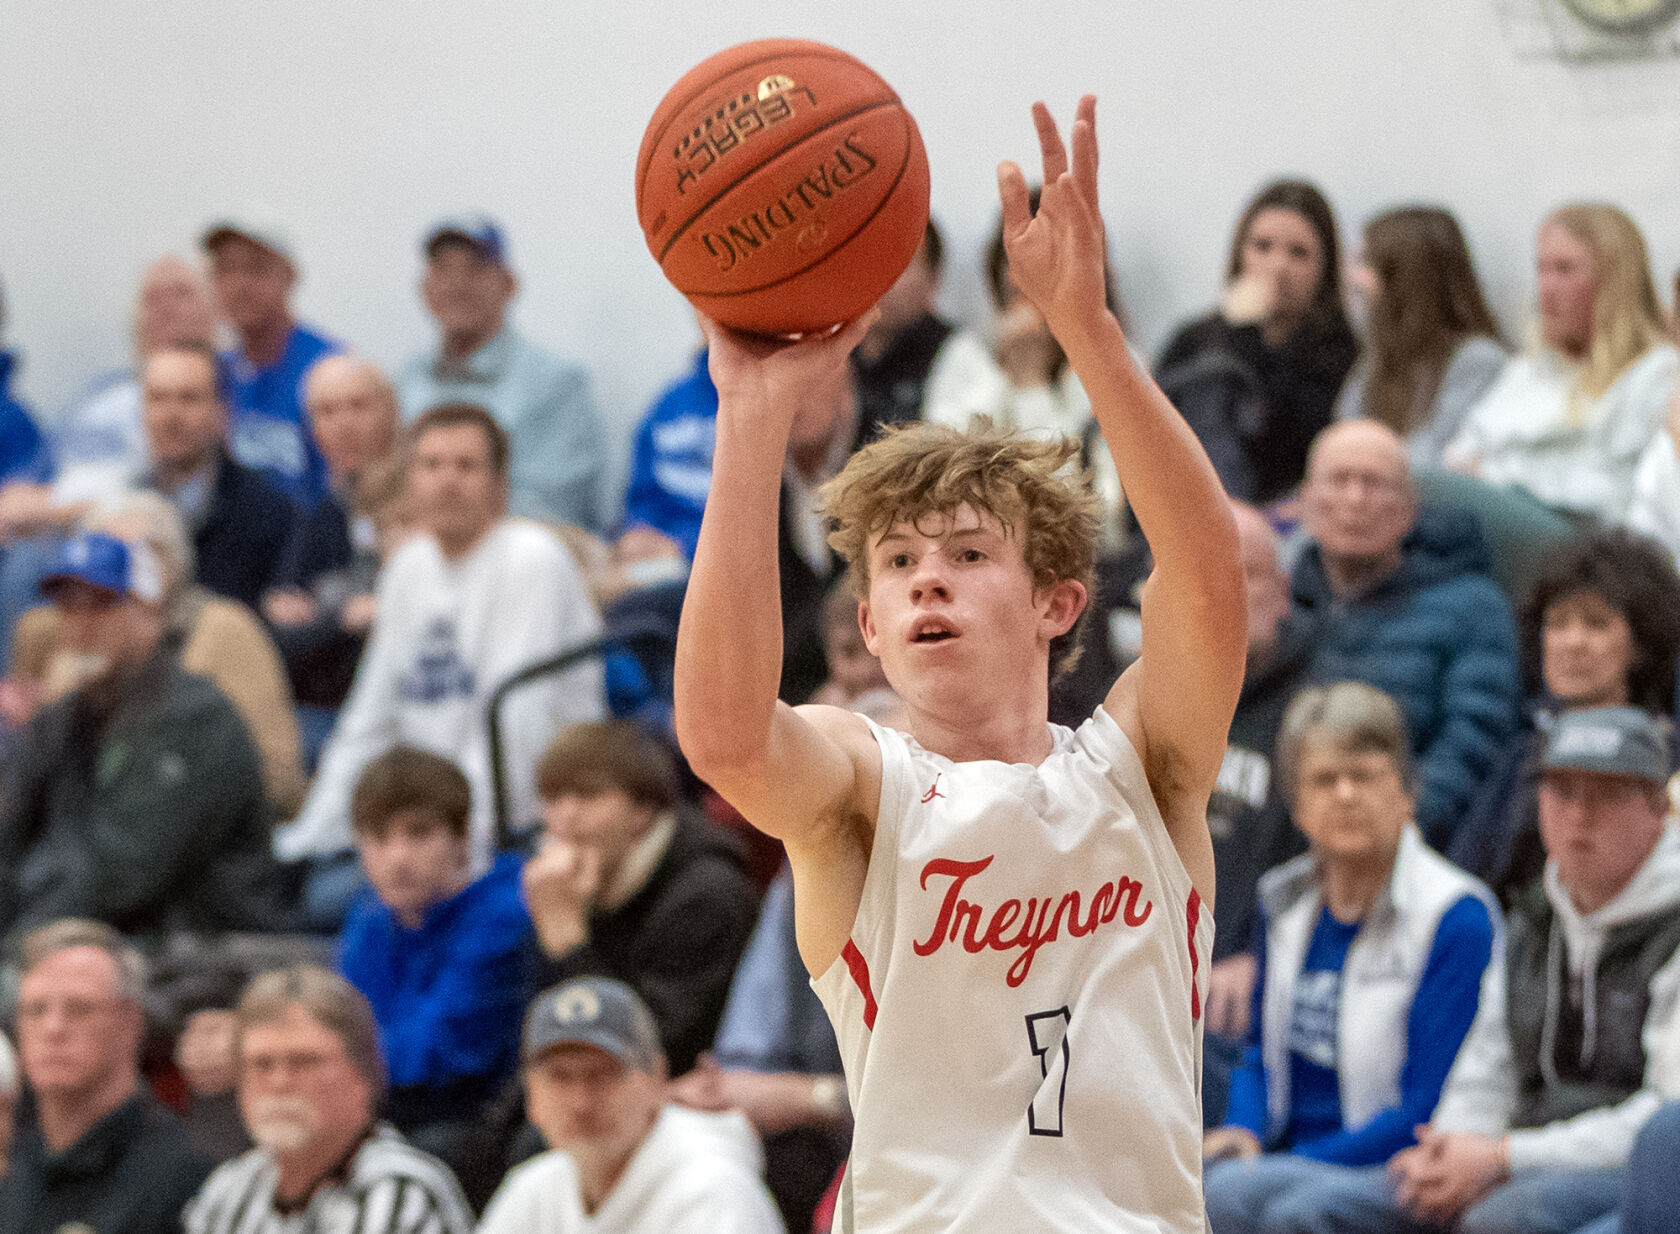 Treynor Cardinals pull away from St. Albert Falcons with a late 22-5 run